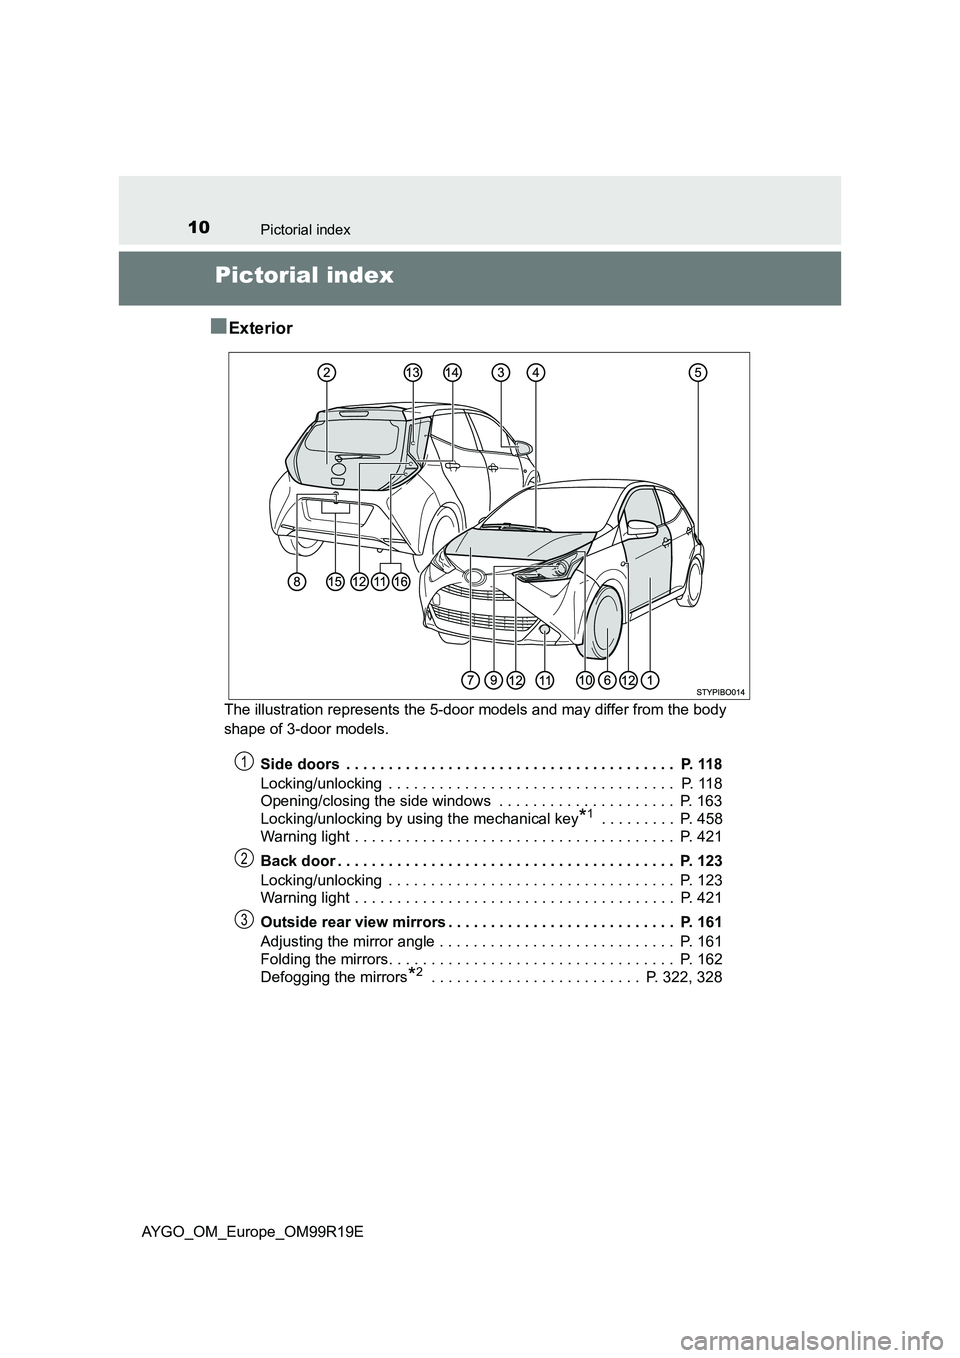 TOYOTA AYGO 2019  Owners Manual (in English) 10Pictorial index
AYGO_OM_Europe_OM99R19E
Pictorial index 
■Exterior
The illustration represents the 5-door  models and may differ from the body  
shape of 3-door models. 
Side doors  . . . . . . . 